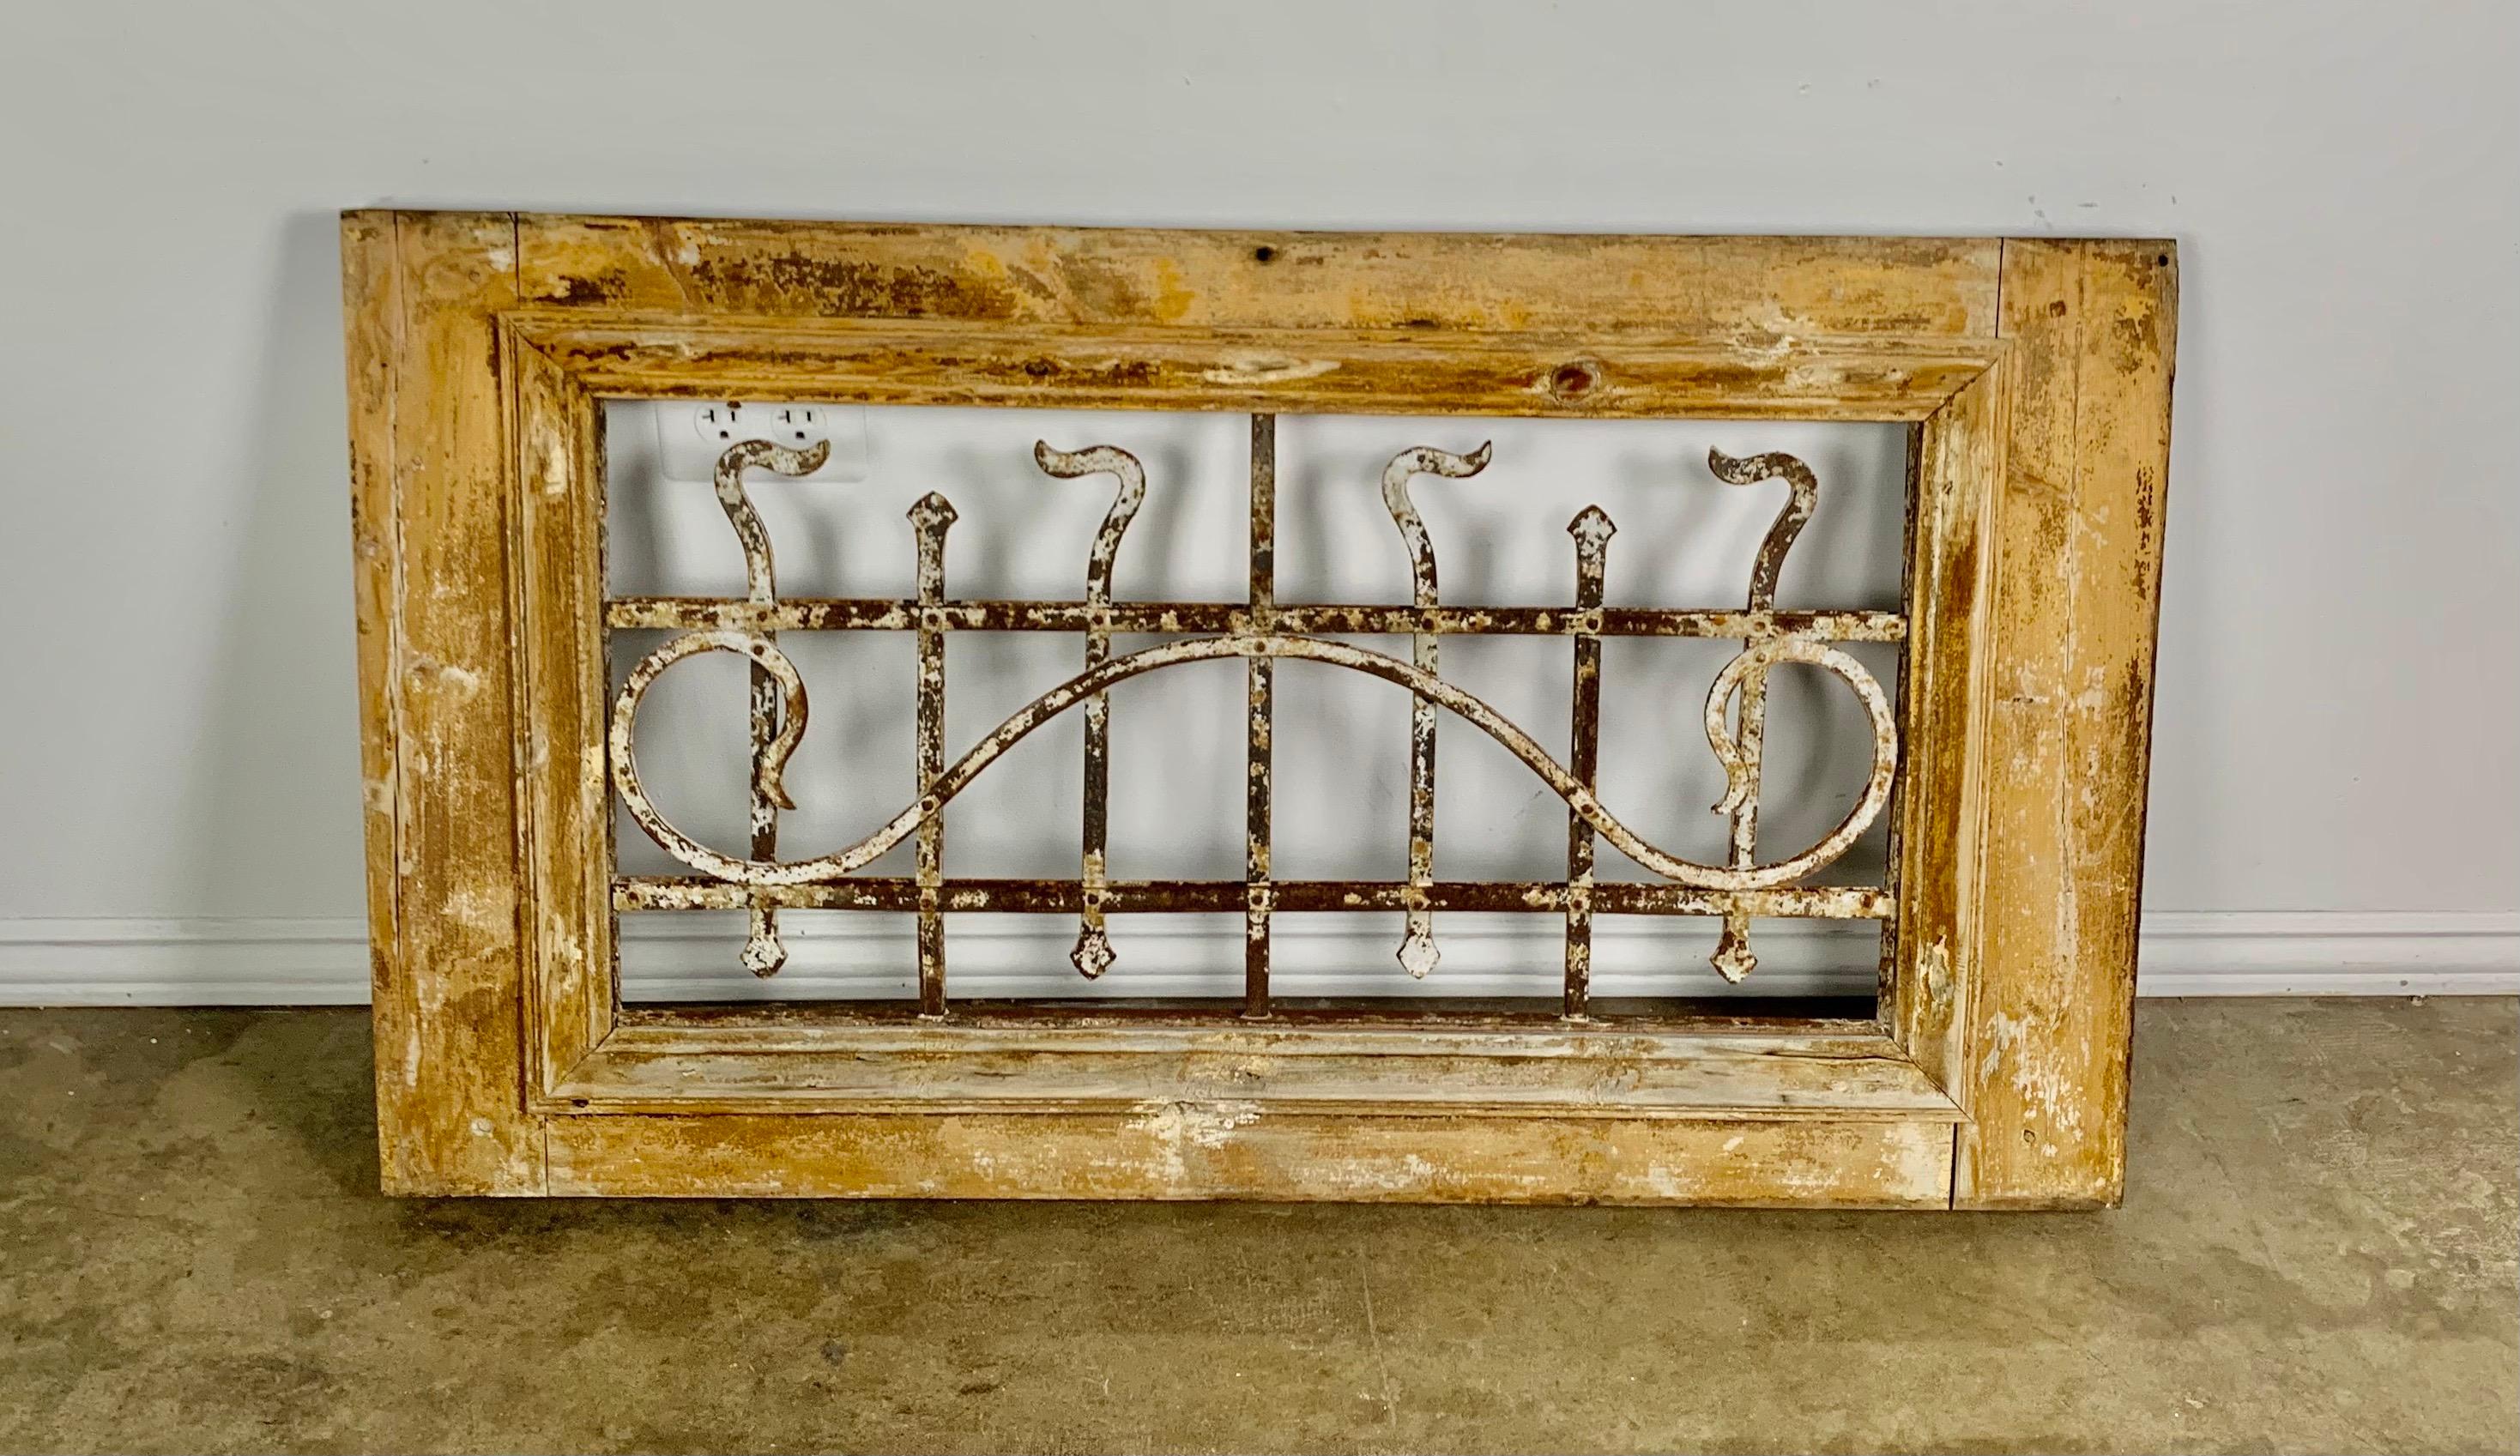 19th century panel made of a wood frame with hand wrought iron inset. Beautiful distressed paint throughout. It would be great to build into a construction project or incorporate as interesting wall decor.